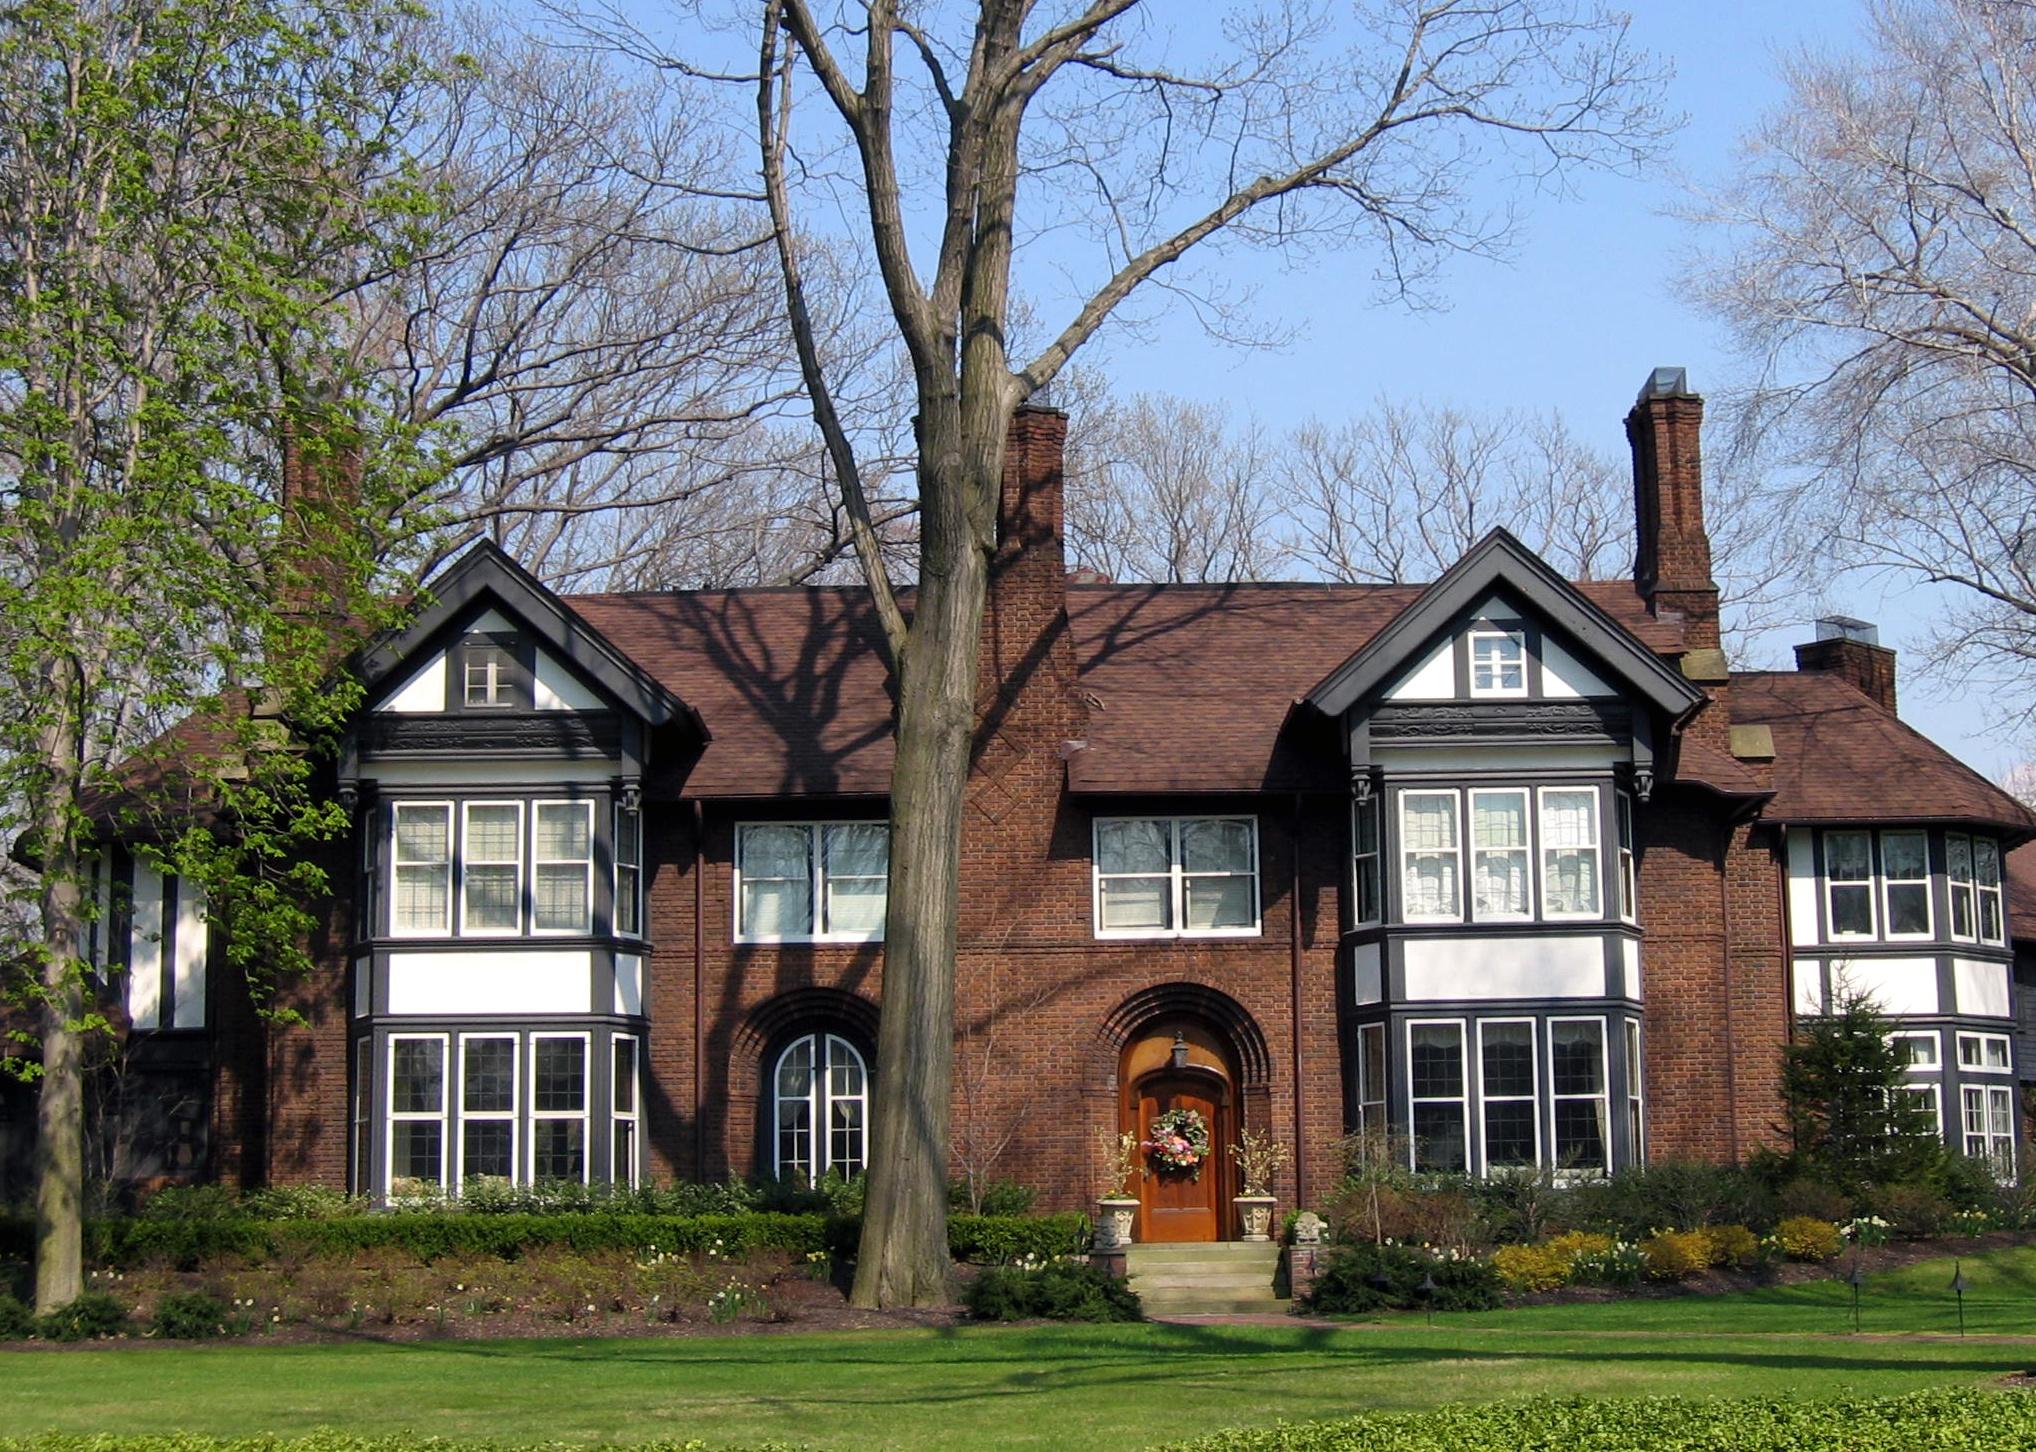 A beautiful home in Shaker Heights, Ohio.